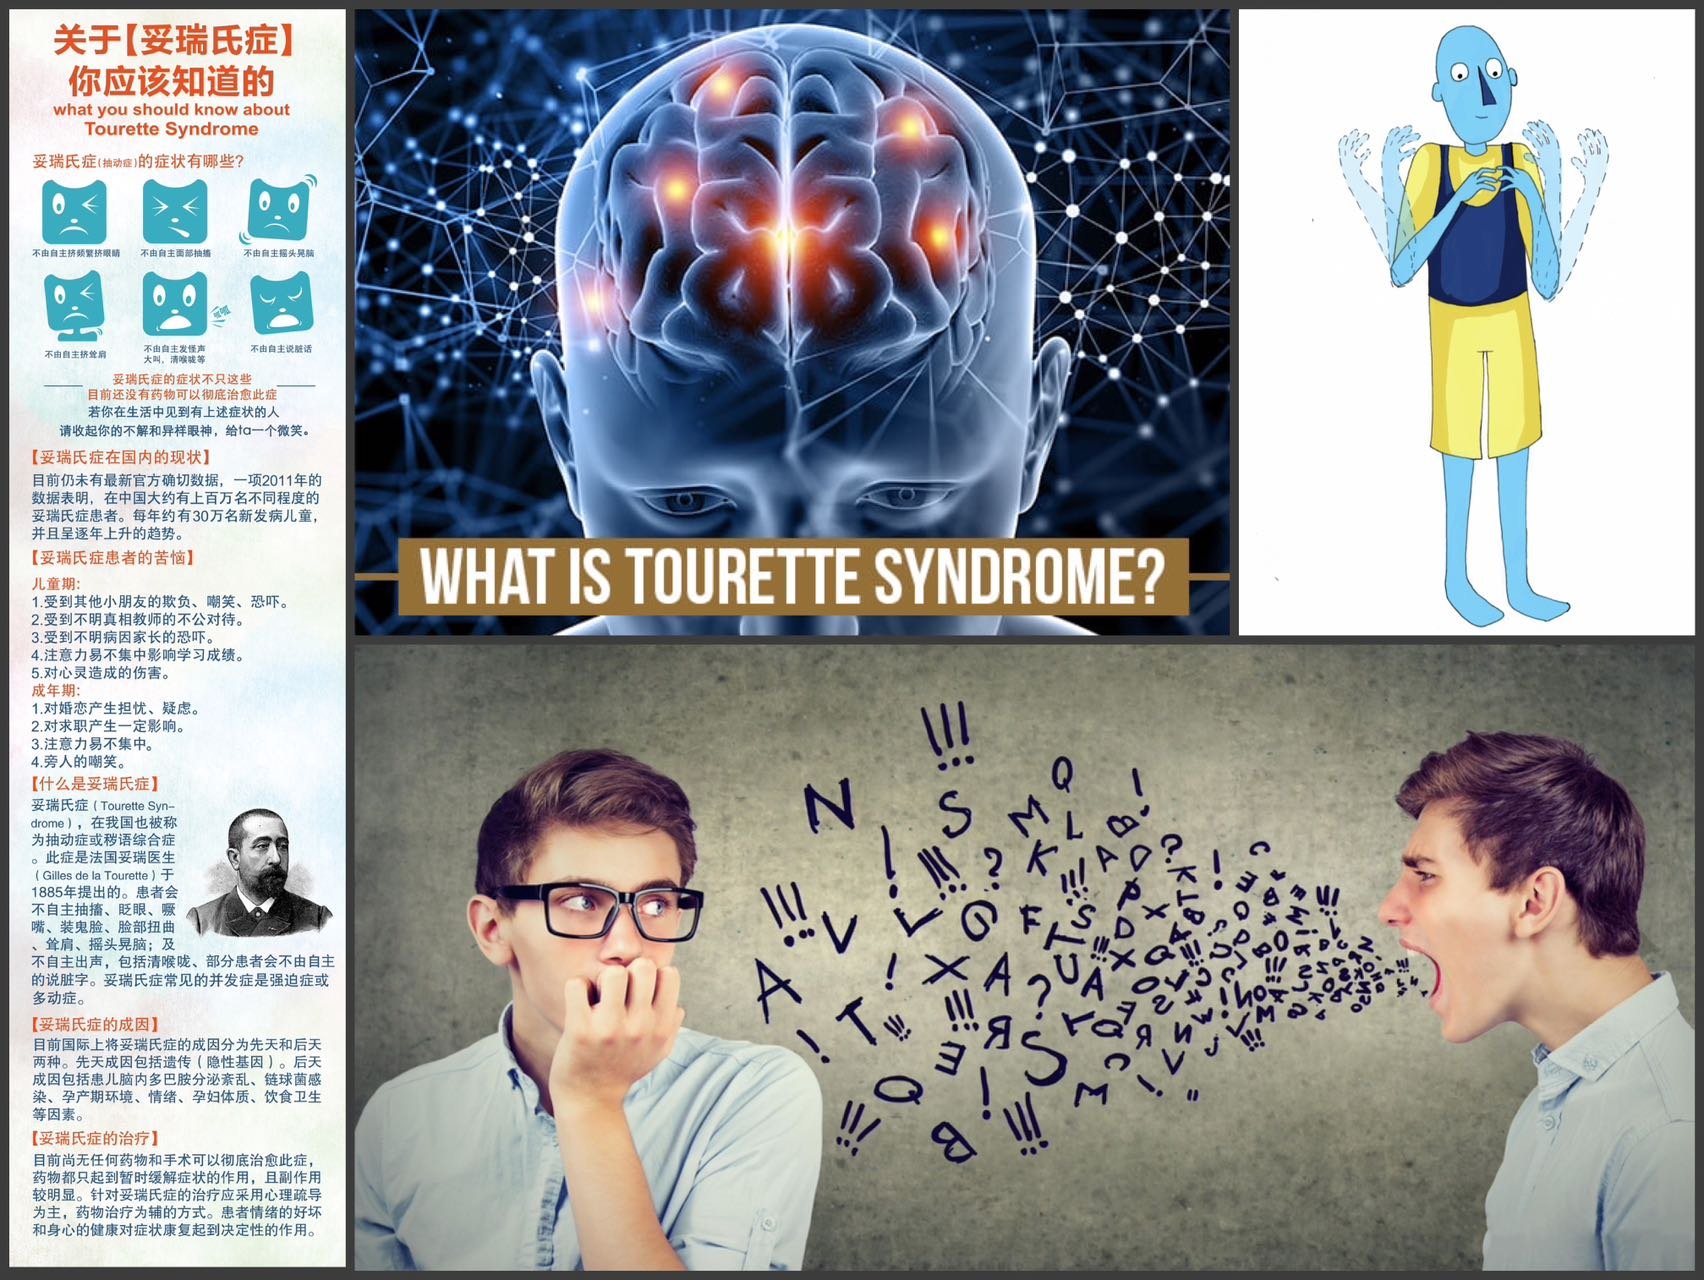 Dajiang: Tourette's is a neurological condition that makes patients have involuntary body movements and vocal tics.